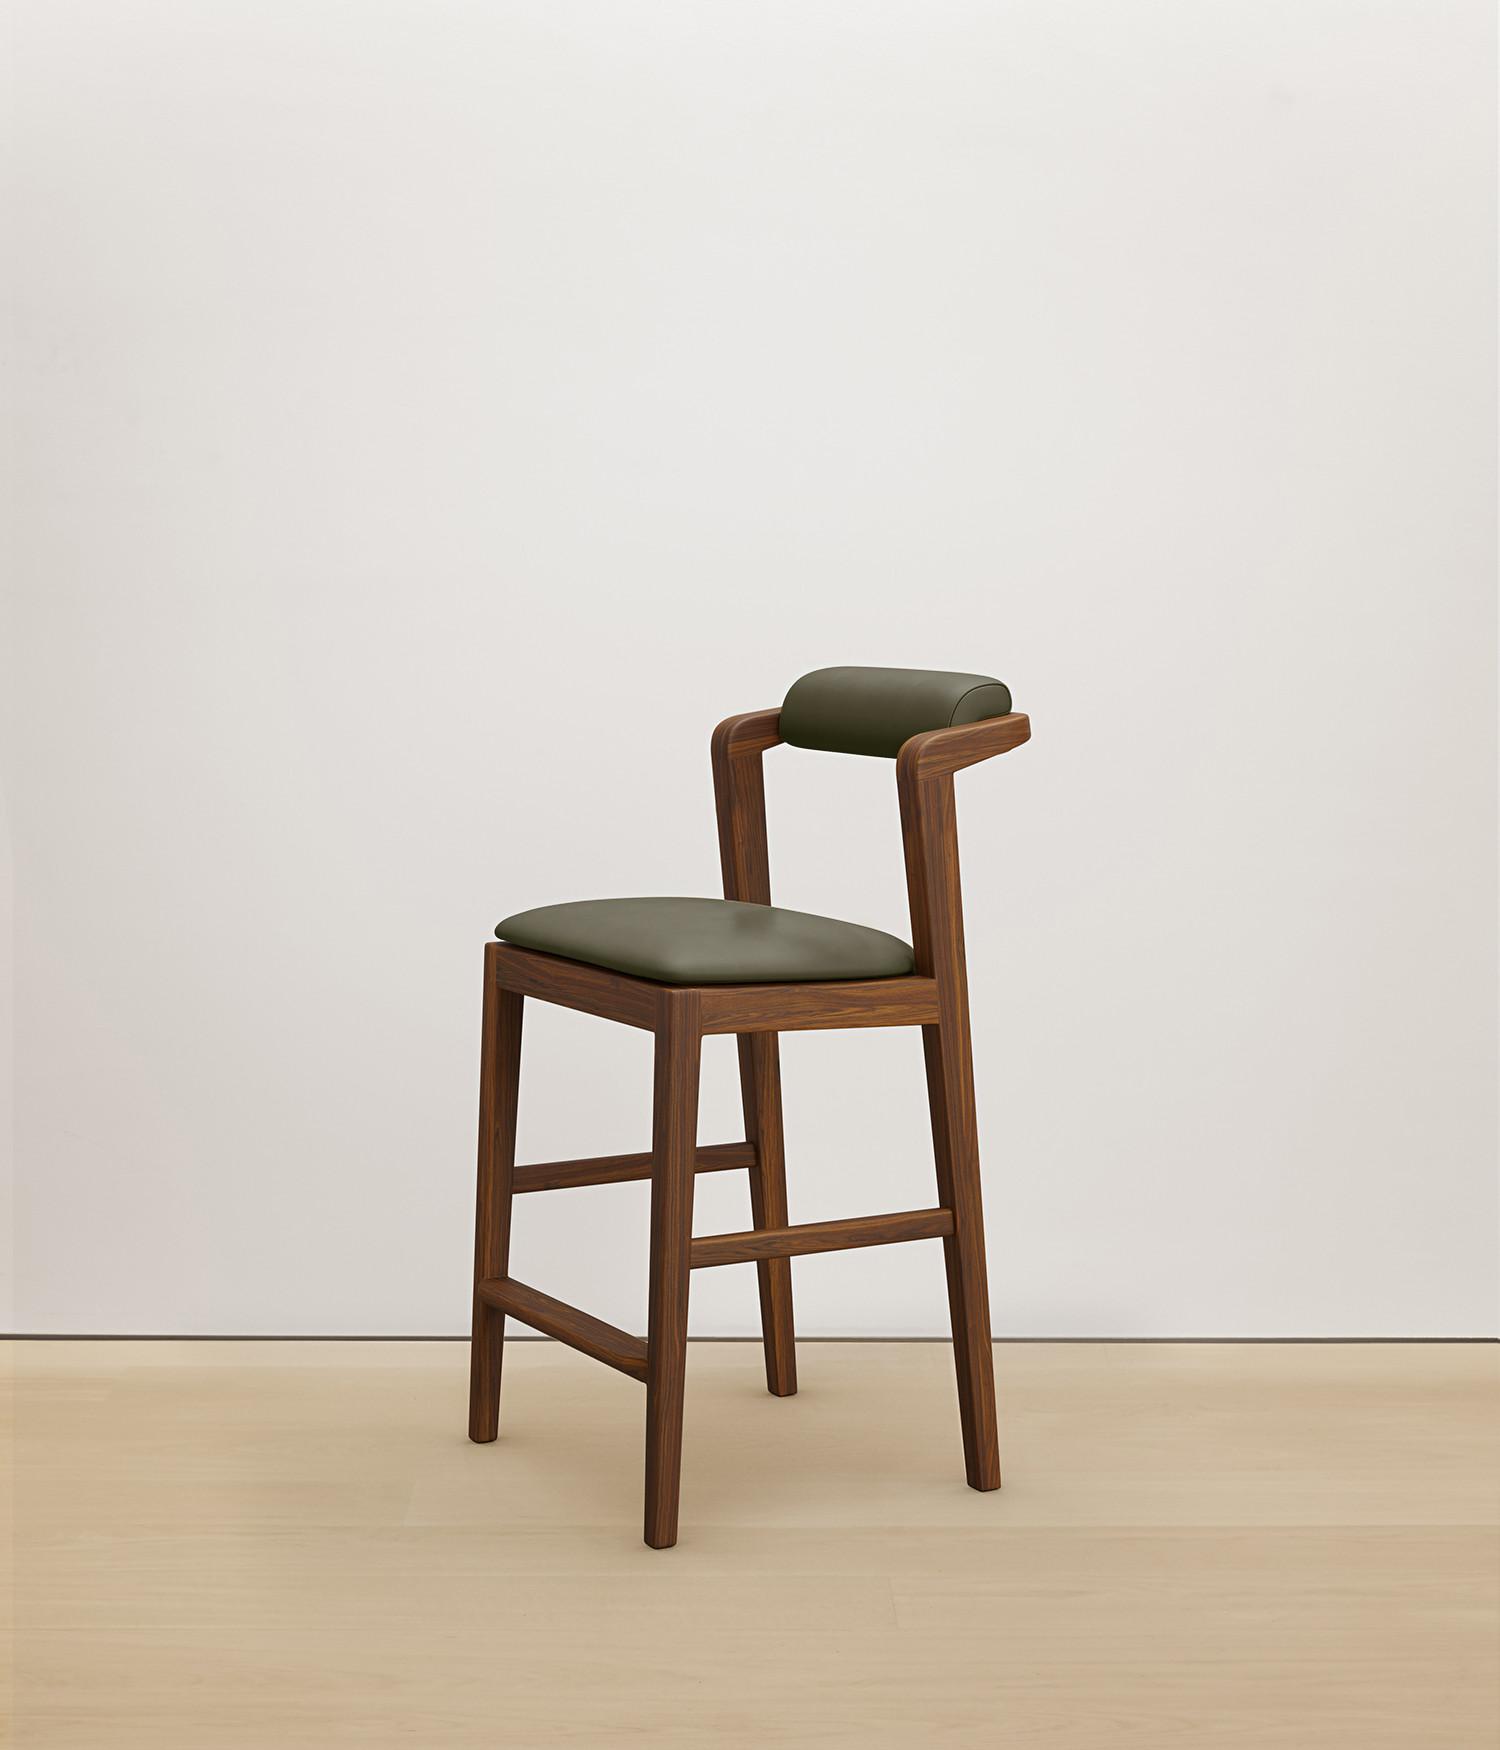  walnut stool with forest color upholstered seat